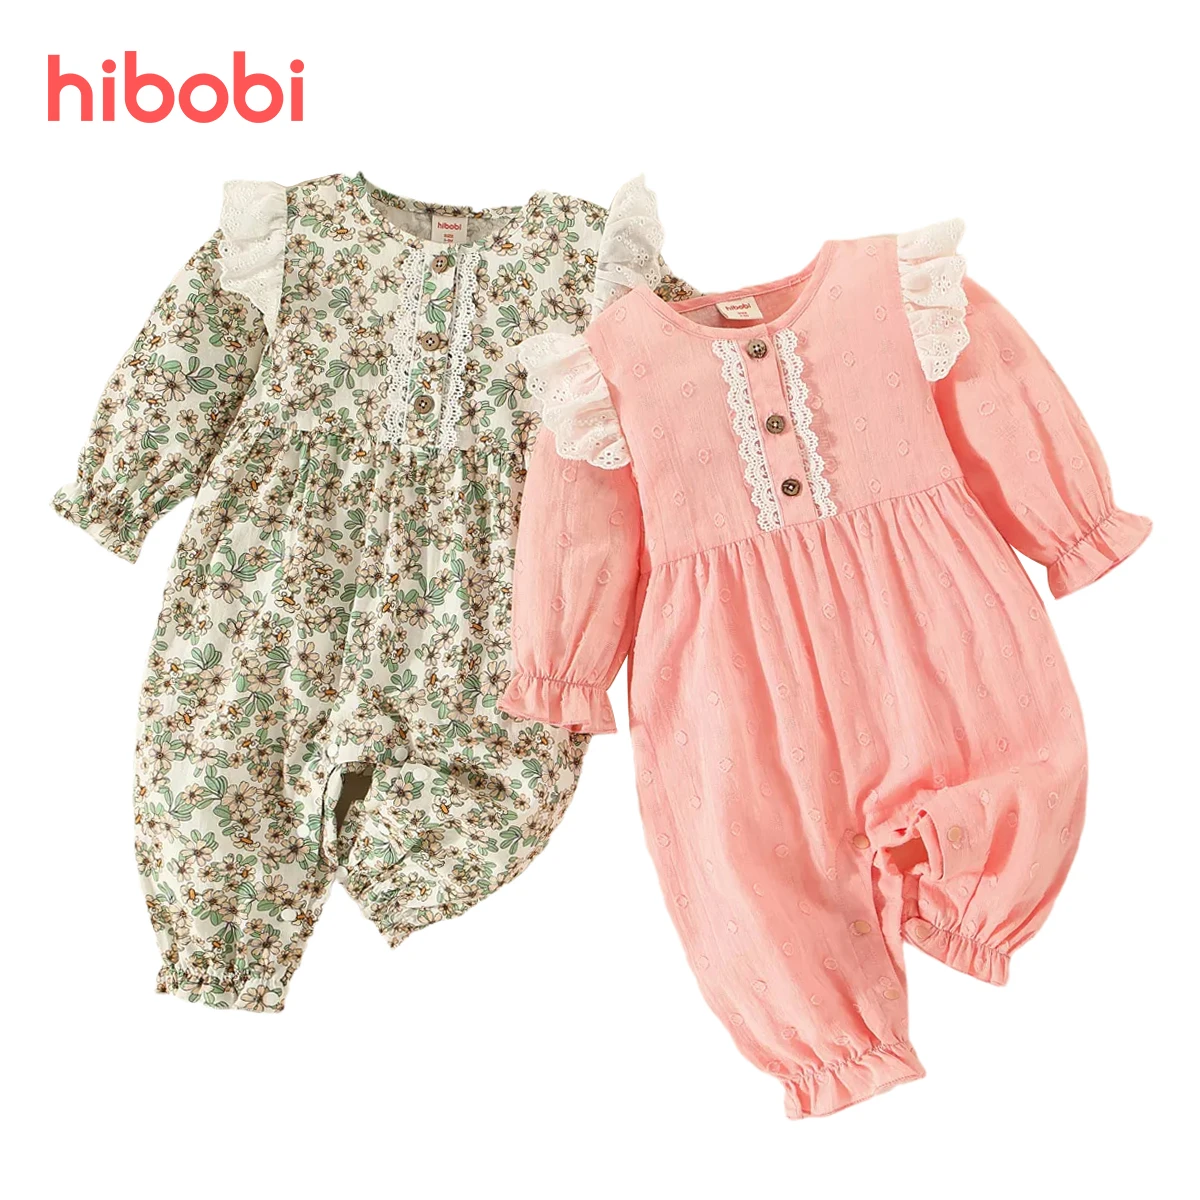 

hibobi Baby Girls Romper Autumn Long Sleeve Solid Color Cotton Jumpsuit With Bowknot Headband Cute Daisy Decor Infant Outfit